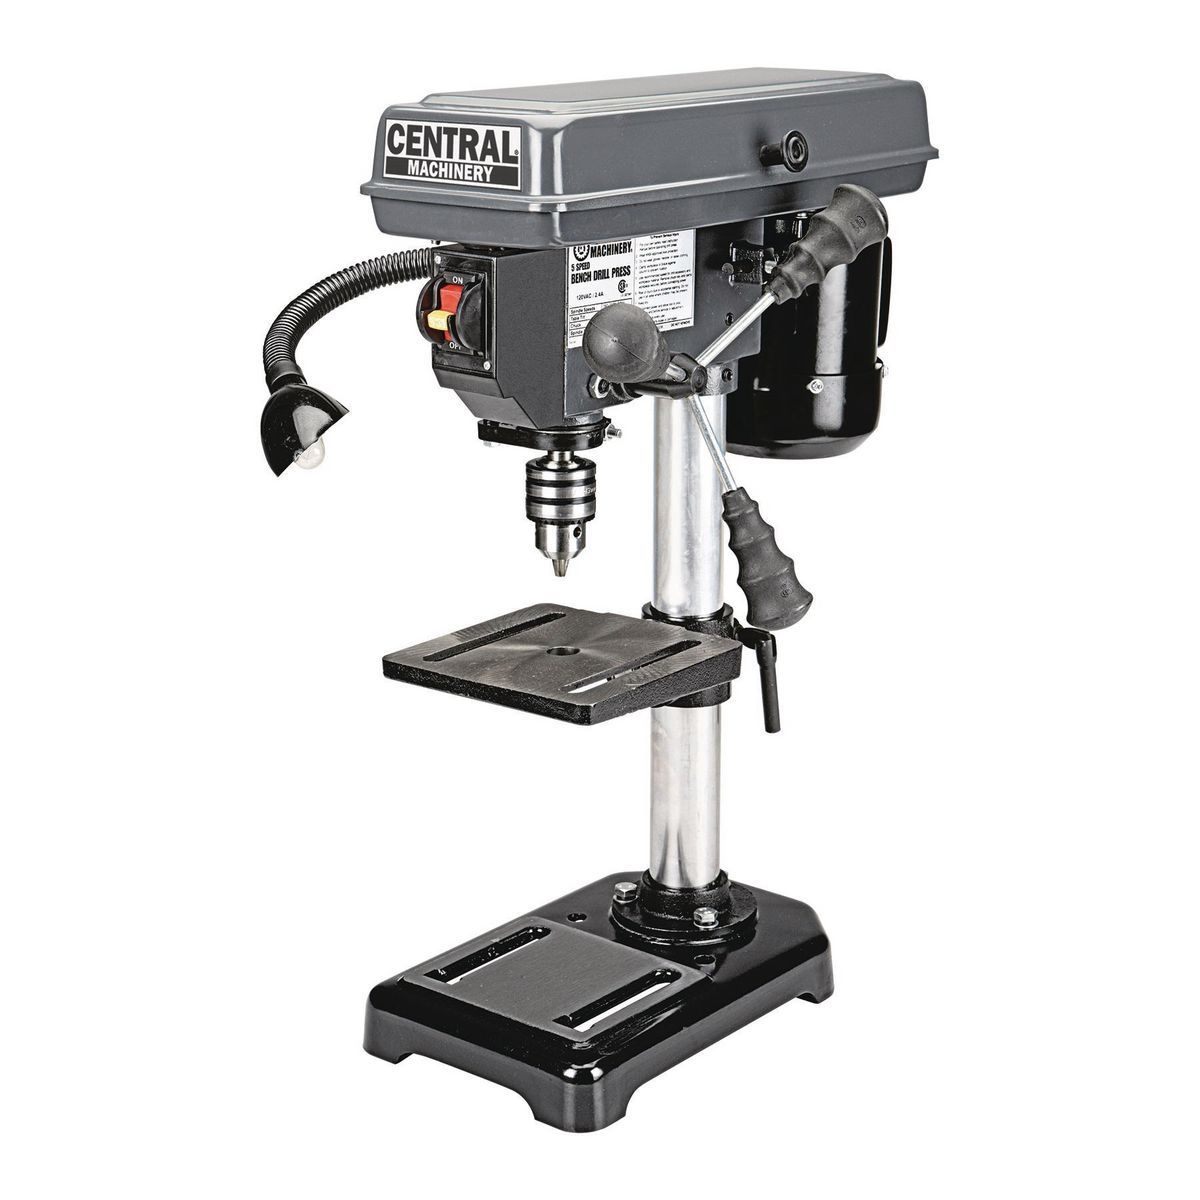 CENTRAL MACHINERY 8 in. 5 Speed Bench Drill Press